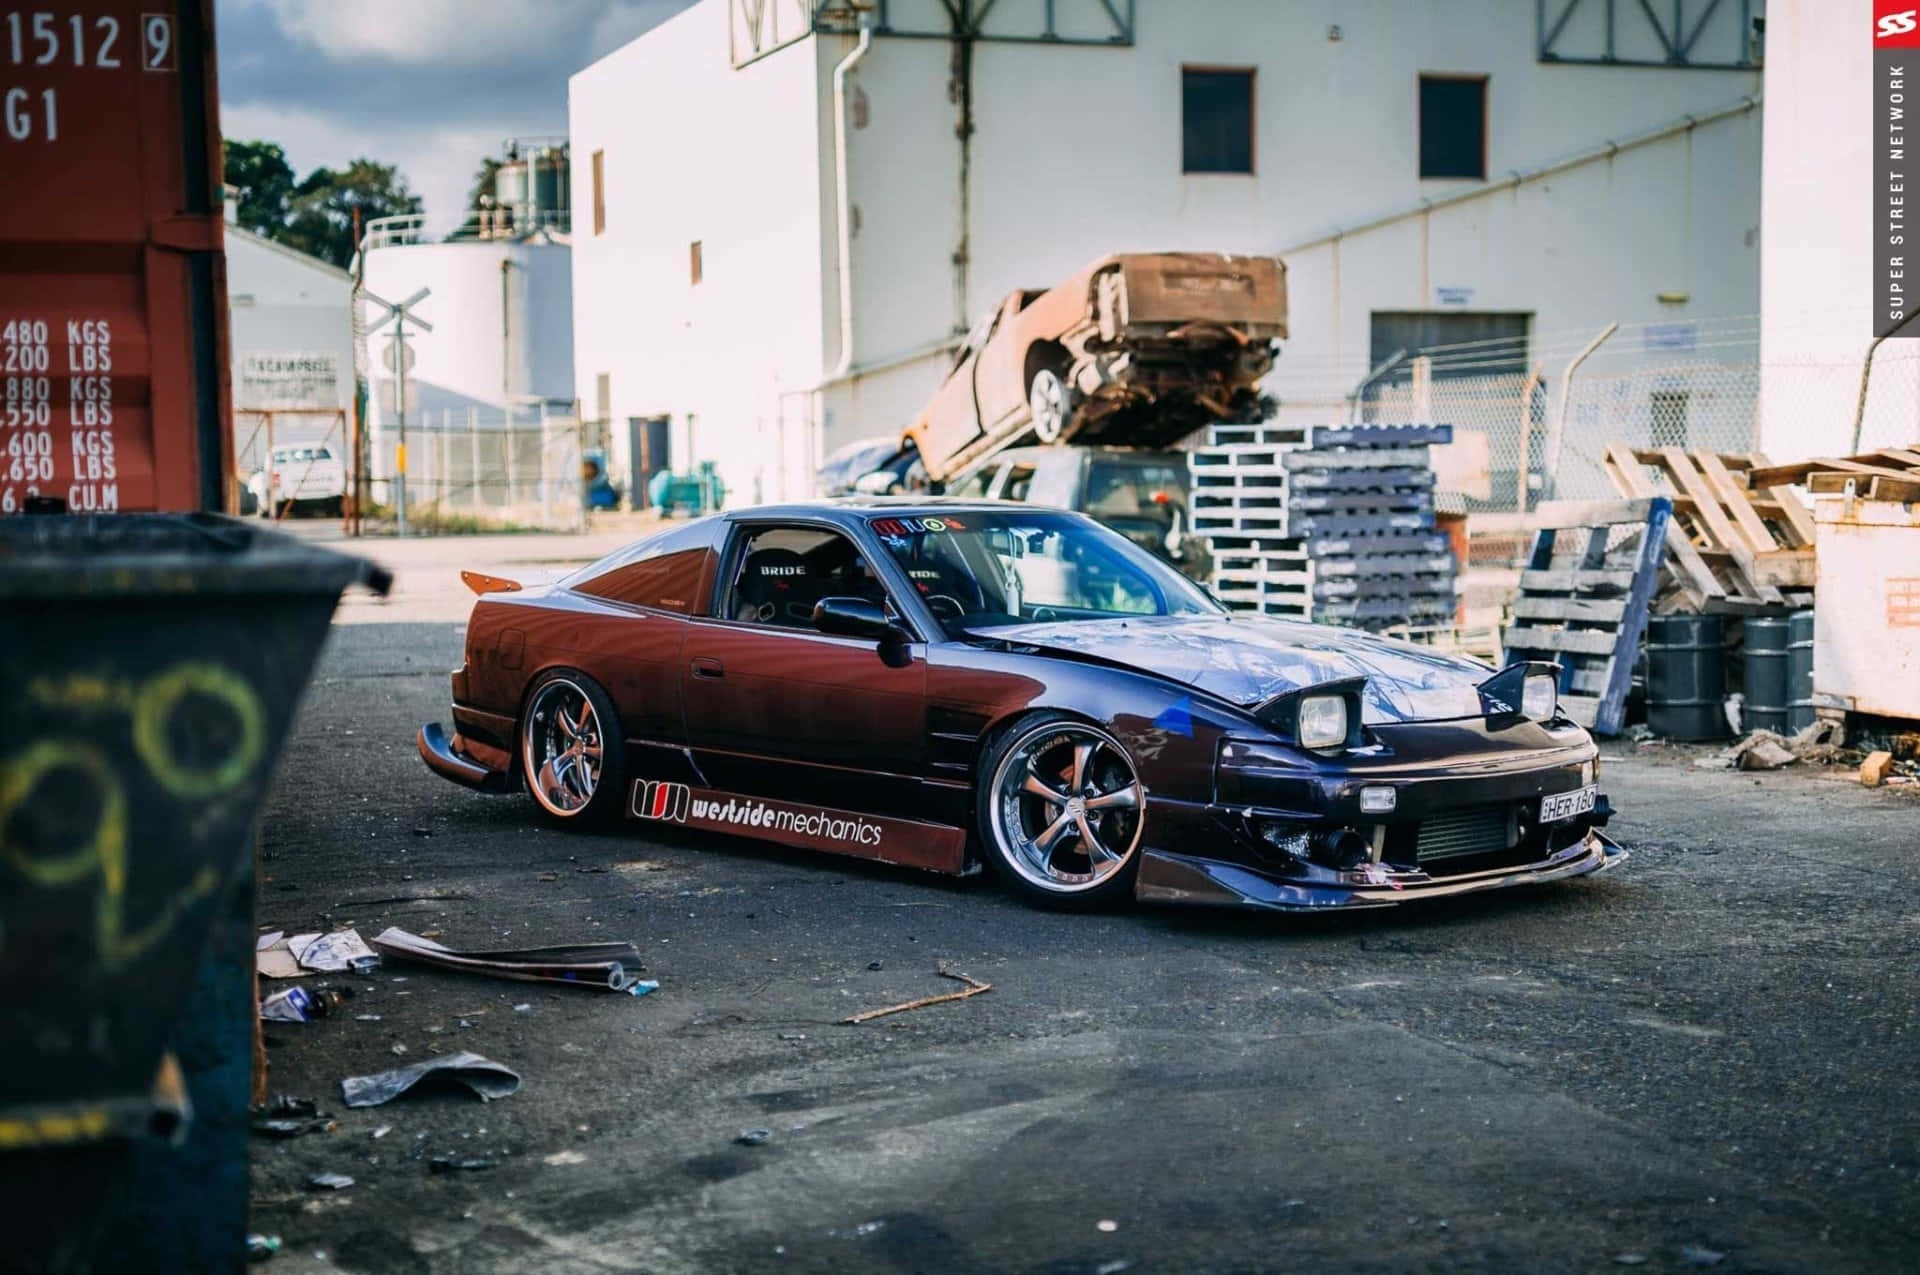 “Experience Speed with the Nissan 180sx” Wallpaper